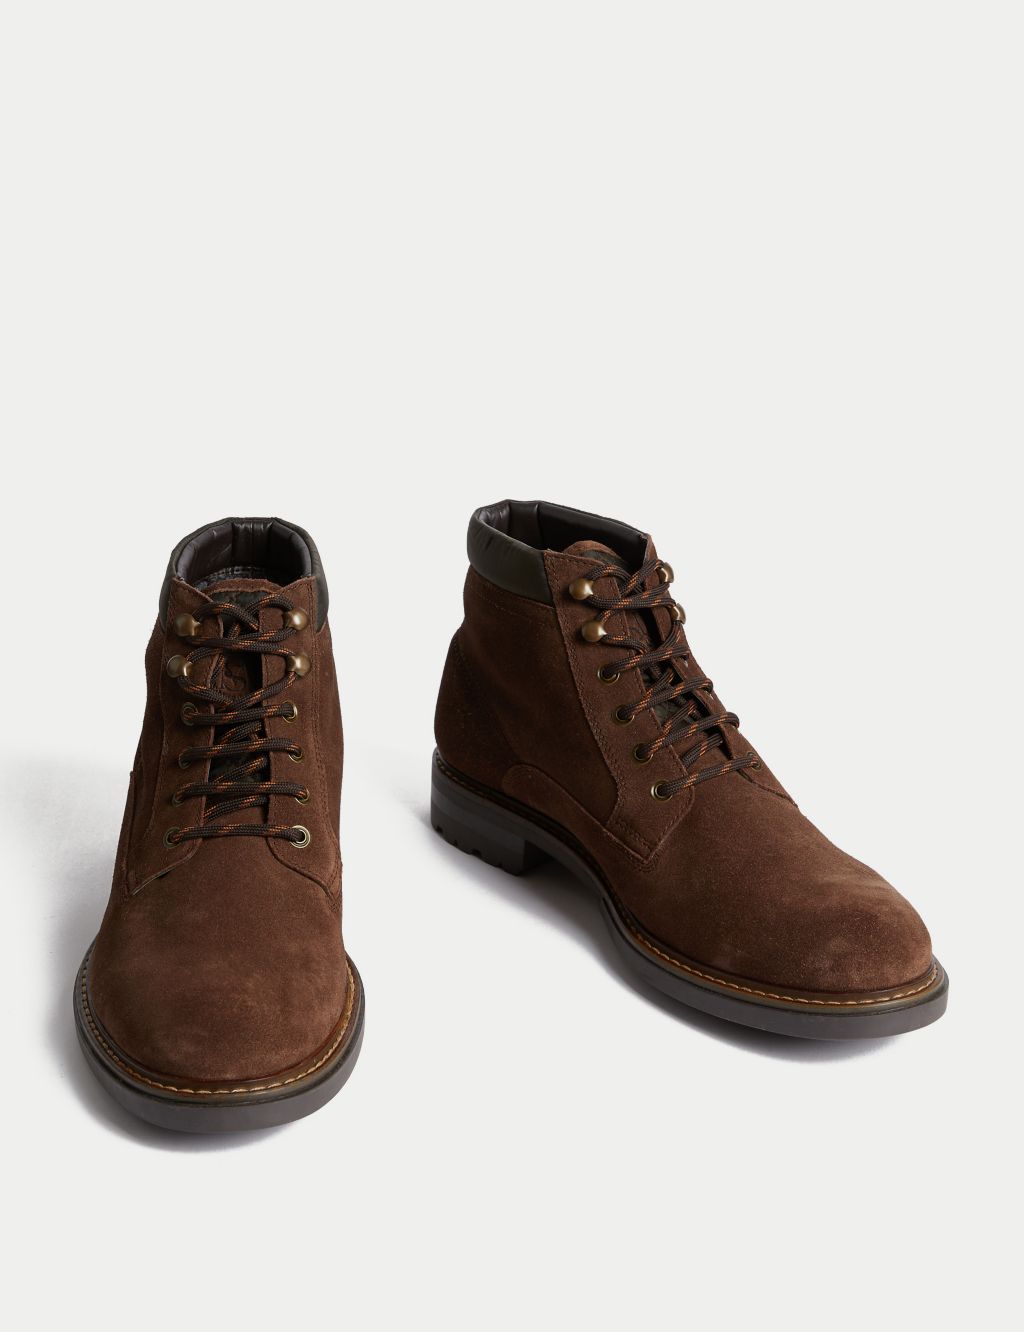 Suede Casual Boots image 2